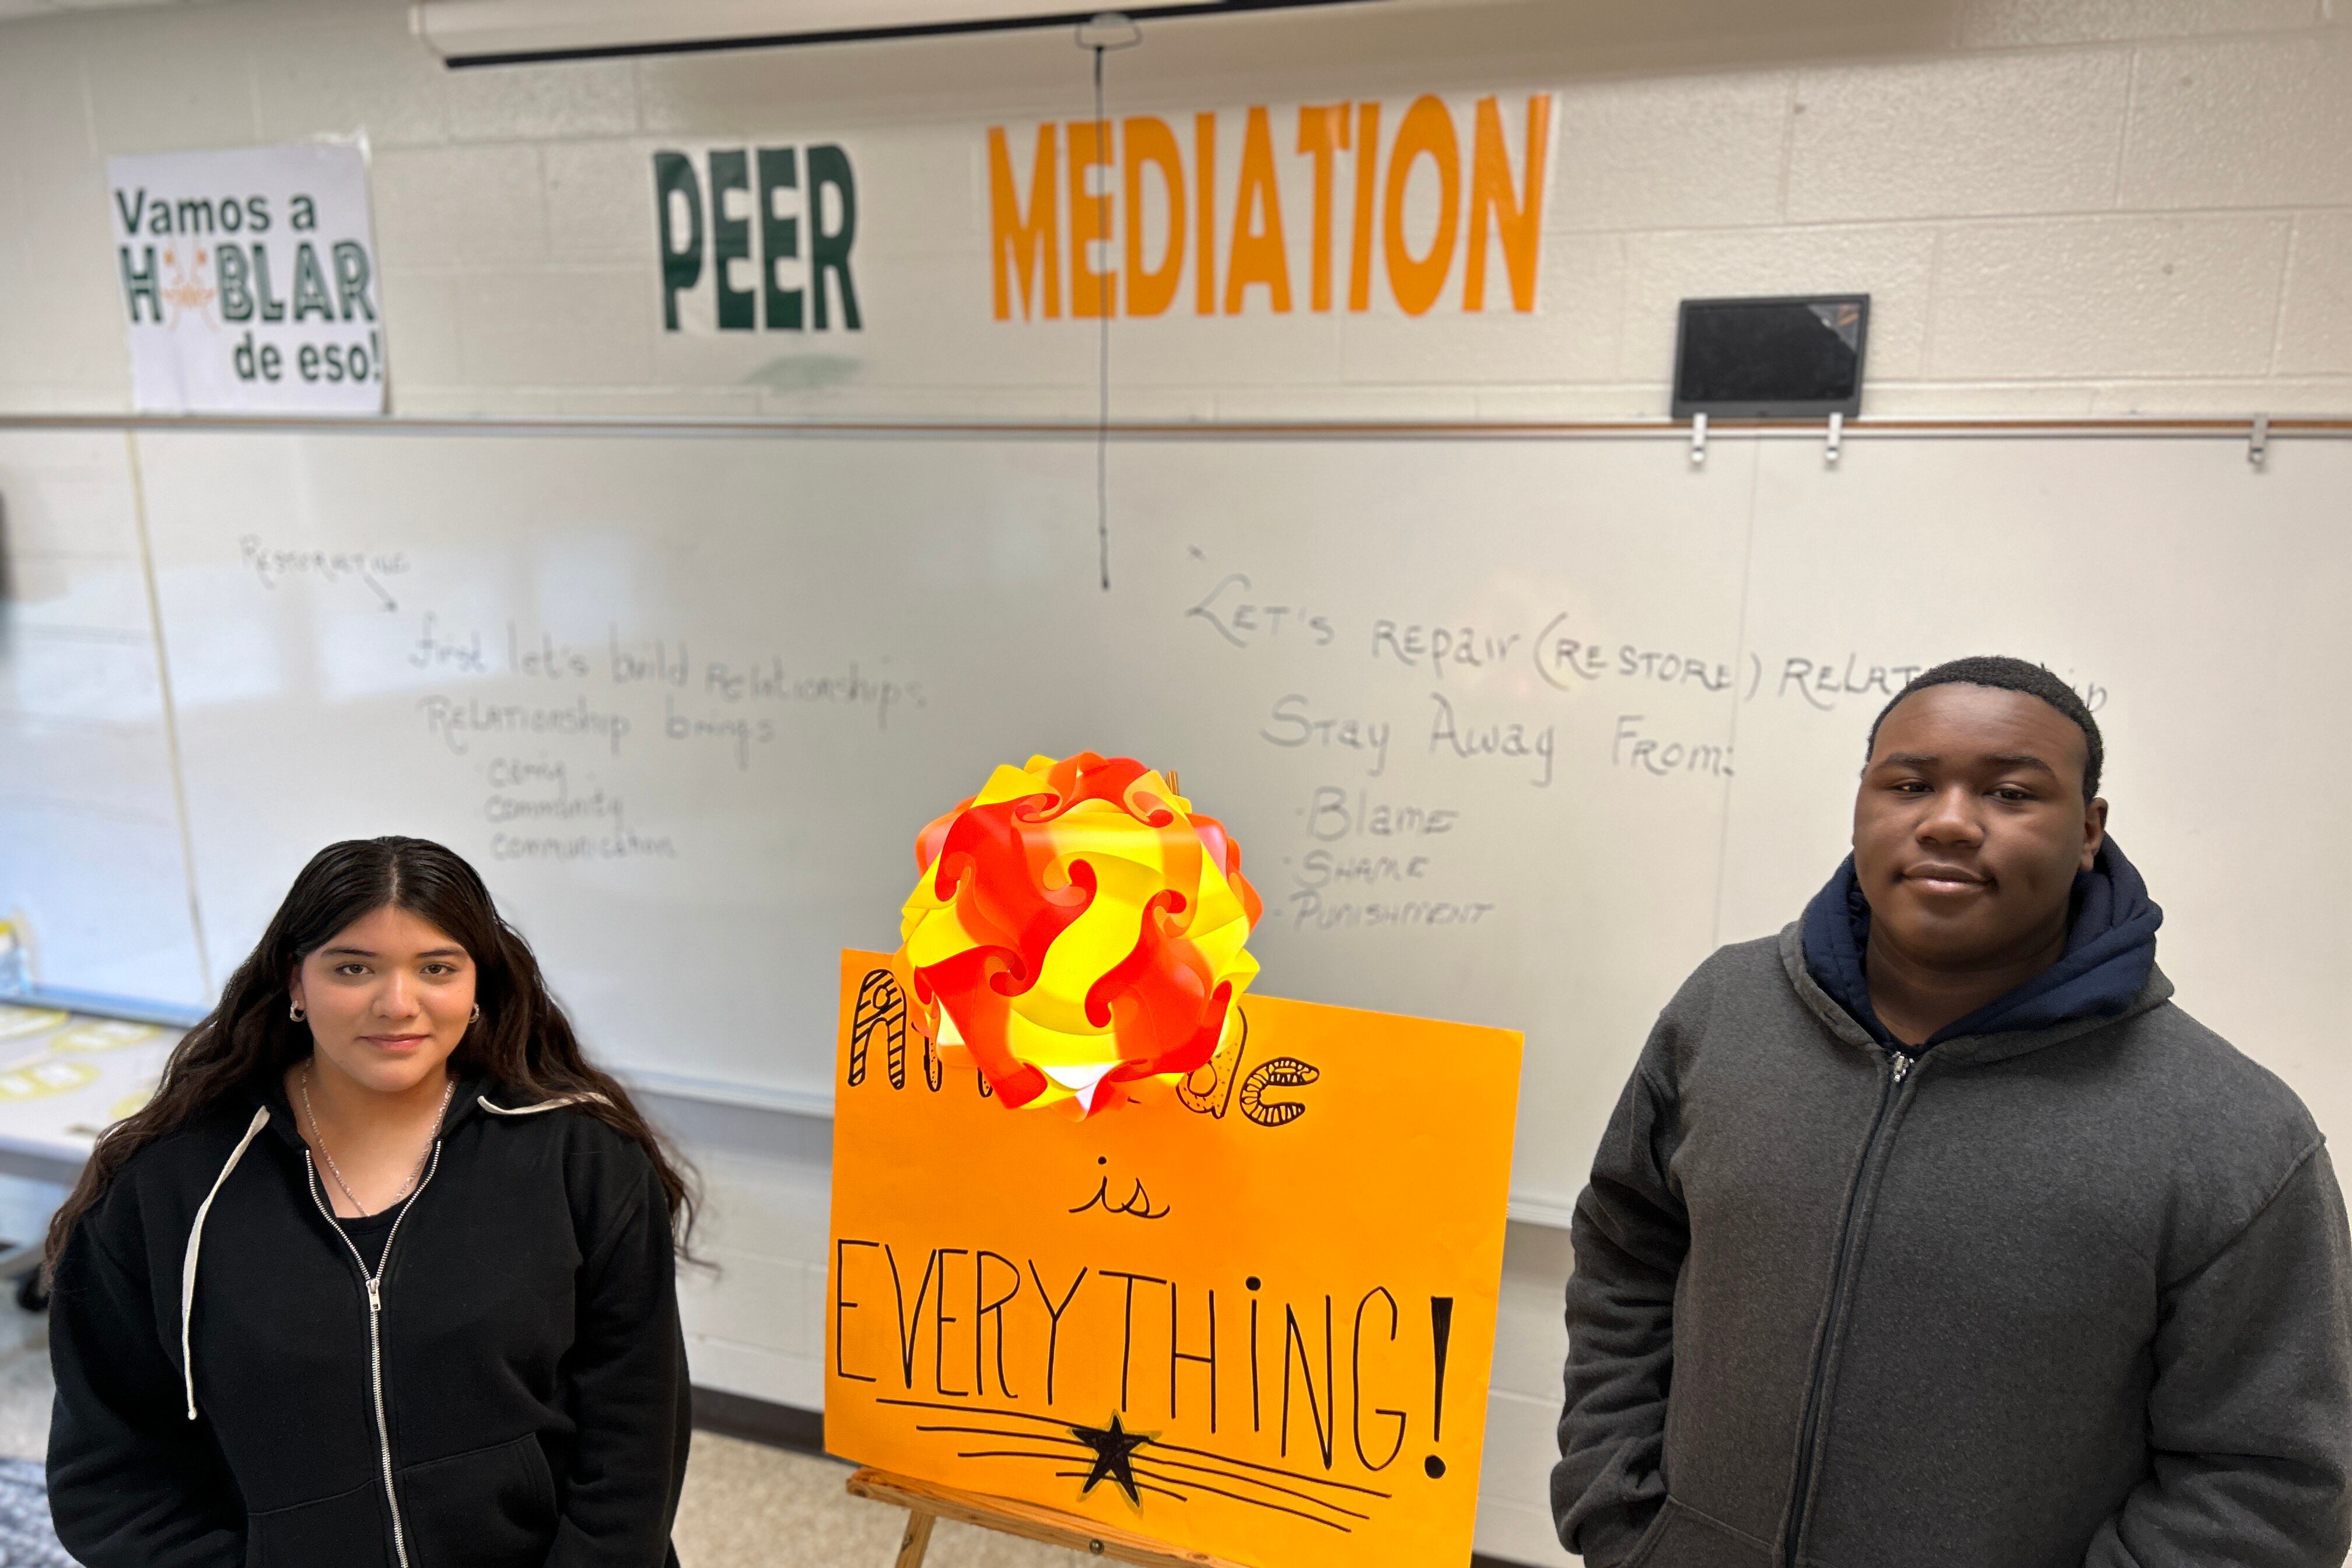 Two students both wearing zip up sweaters stand on each side of an orange poster board that is standing up in front of a dry erase board in a classroom.